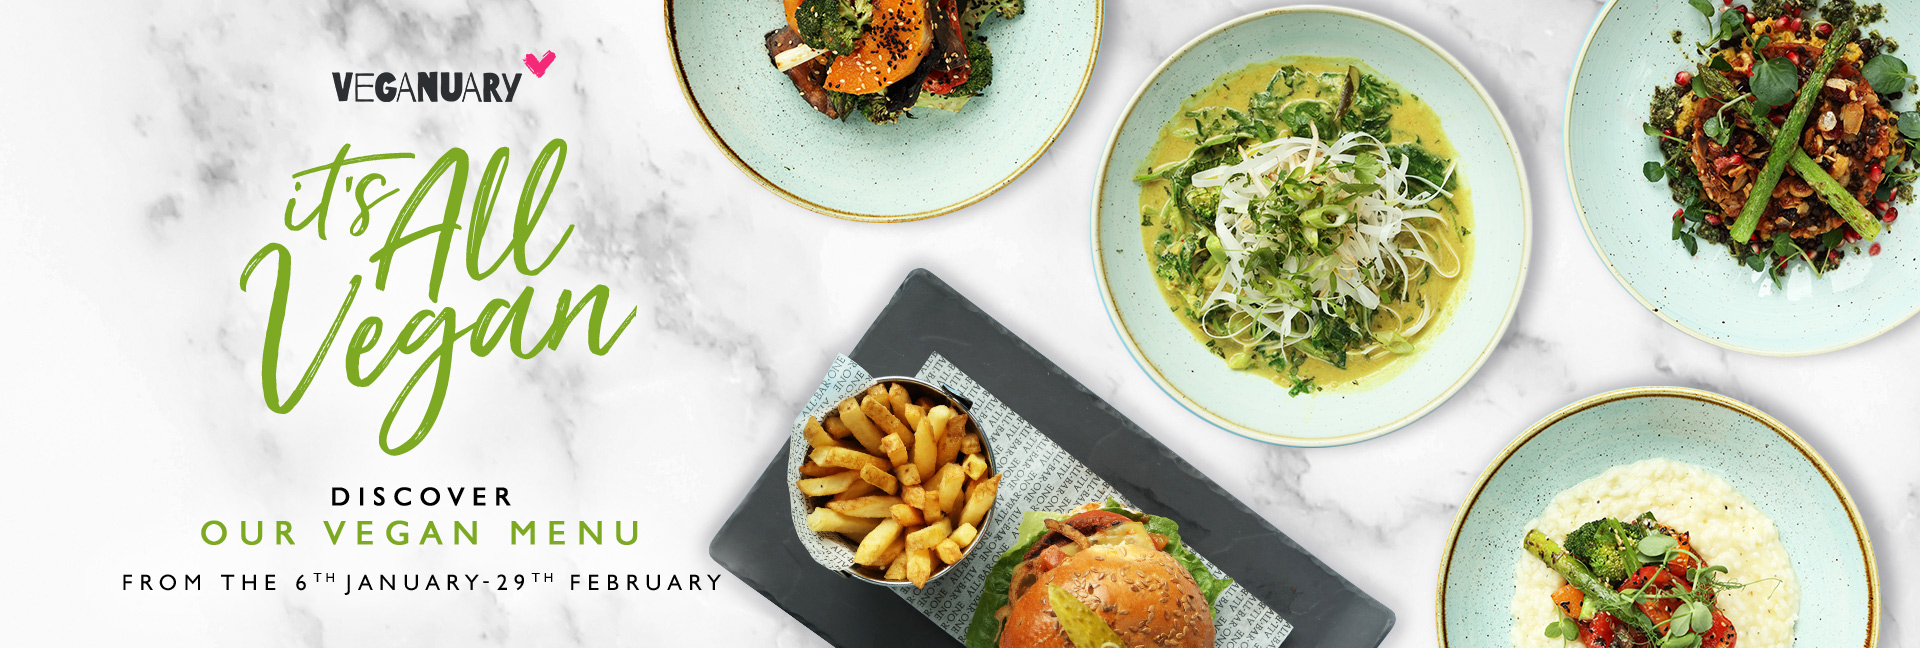 Veganuary Menu at All Bar One Brindleyplace